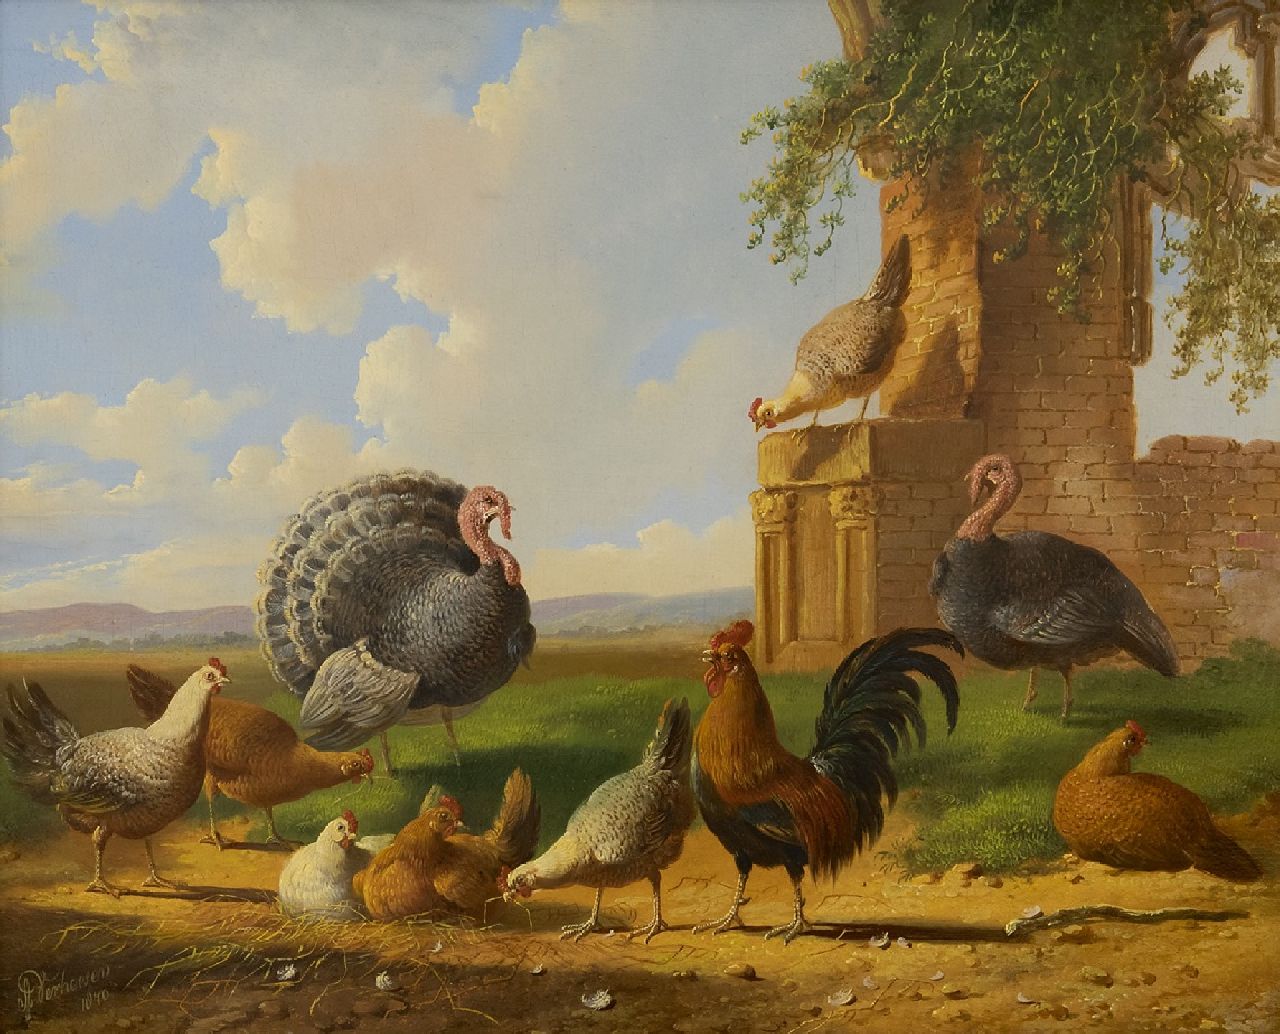 Verhoesen A.  | Albertus Verhoesen | Paintings offered for sale | Turkeys and chicken in a landscape, oil on panel 30.5 x 37.6 cm, signed l.l. and painted 1870